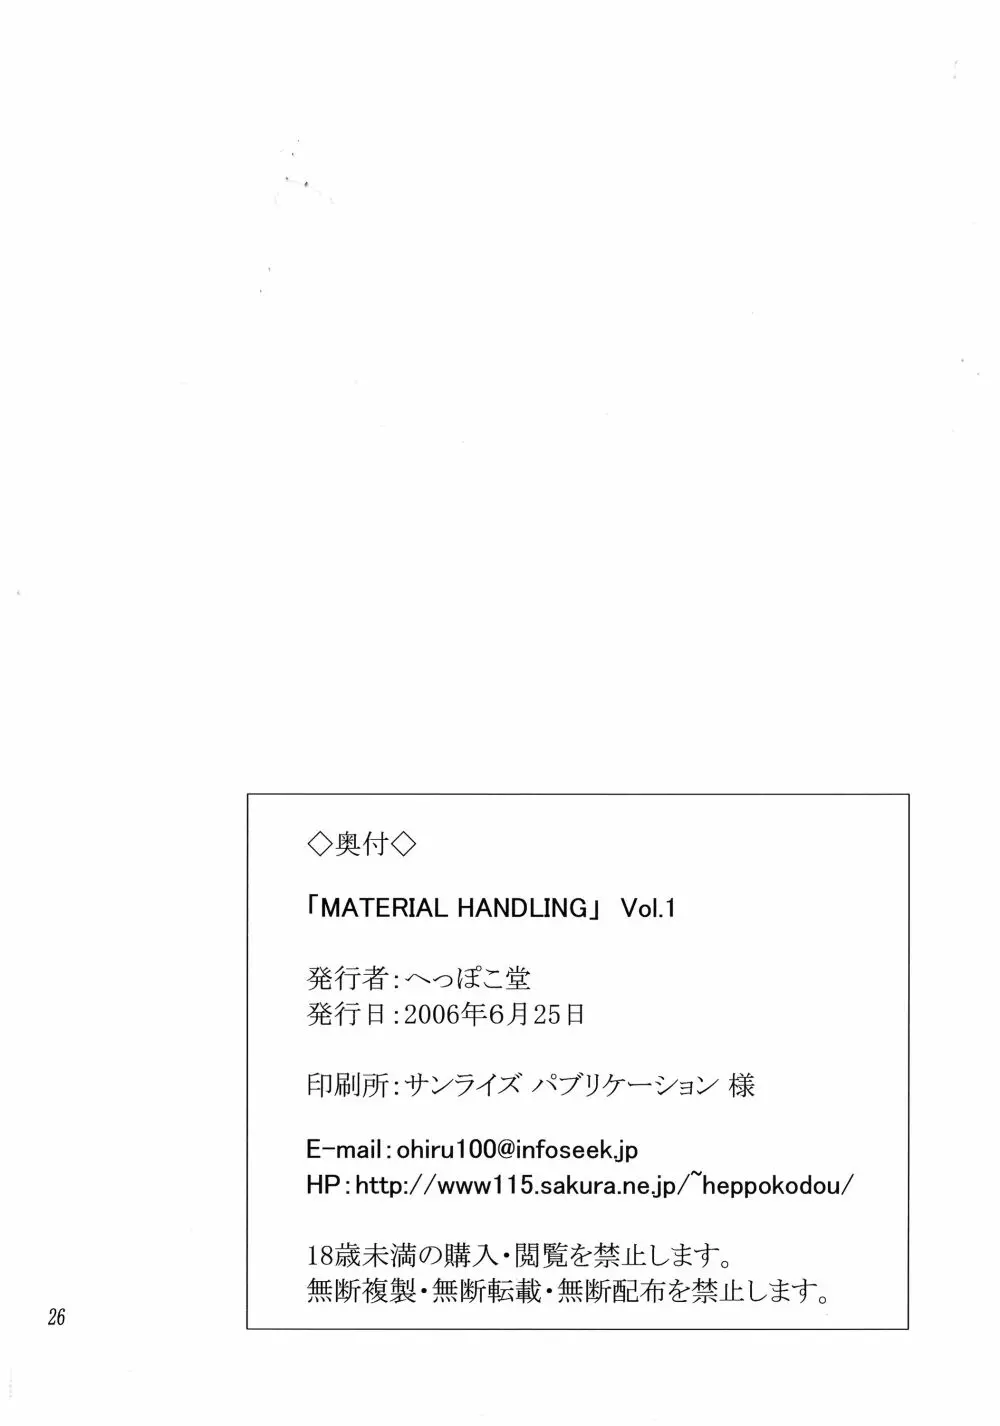 MATERIAL HANDLING Vol.1 Page.26